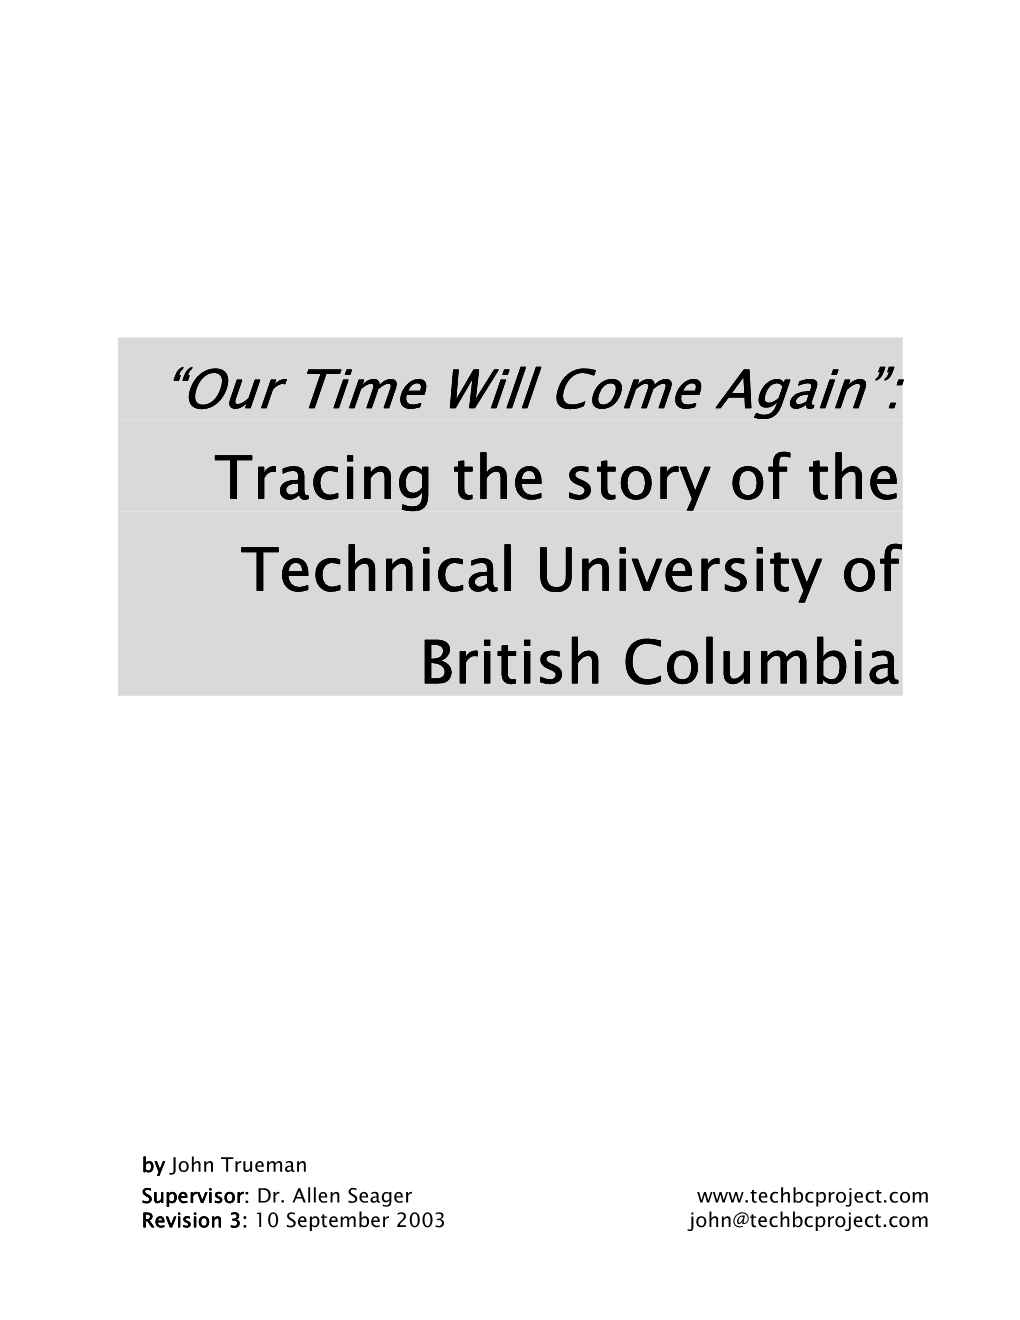 “Our Time Will Come Again”: Tracing the Story of the Technical University of British Columbia